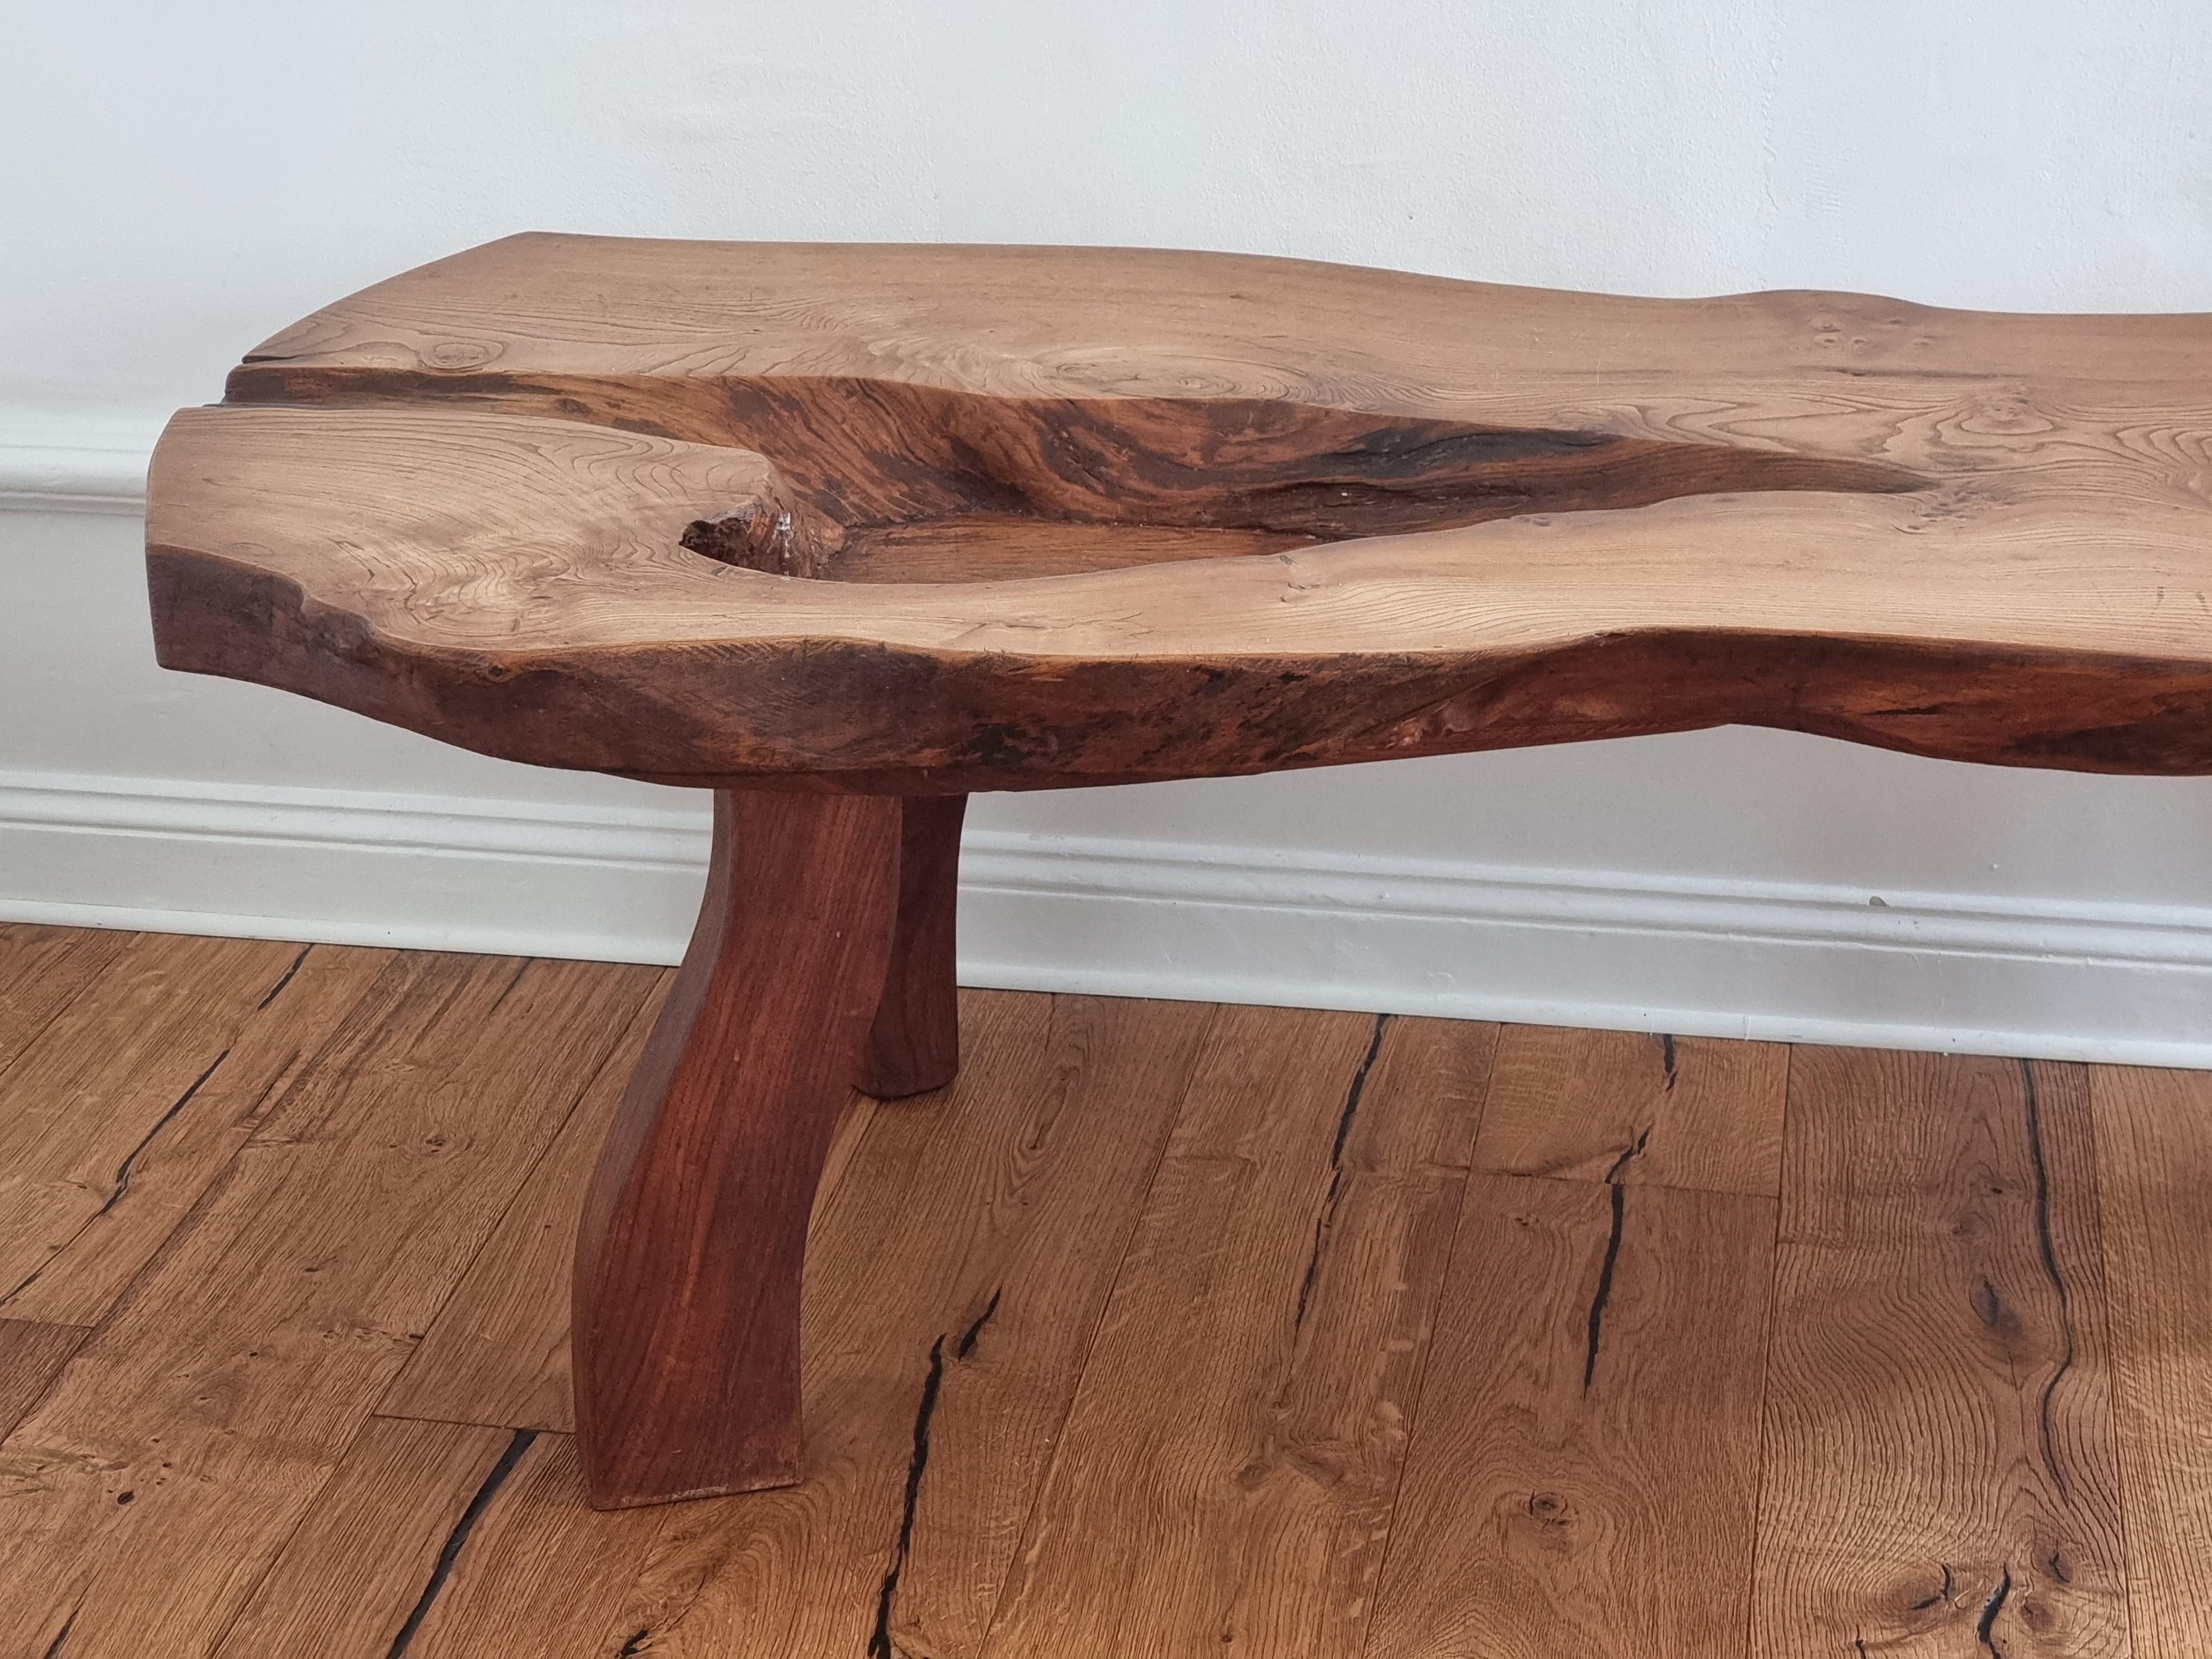 Late 20th Century Large Coffee Table / Bench in Elm, by CA Beijbom, Simlingegård 1974, Sweden